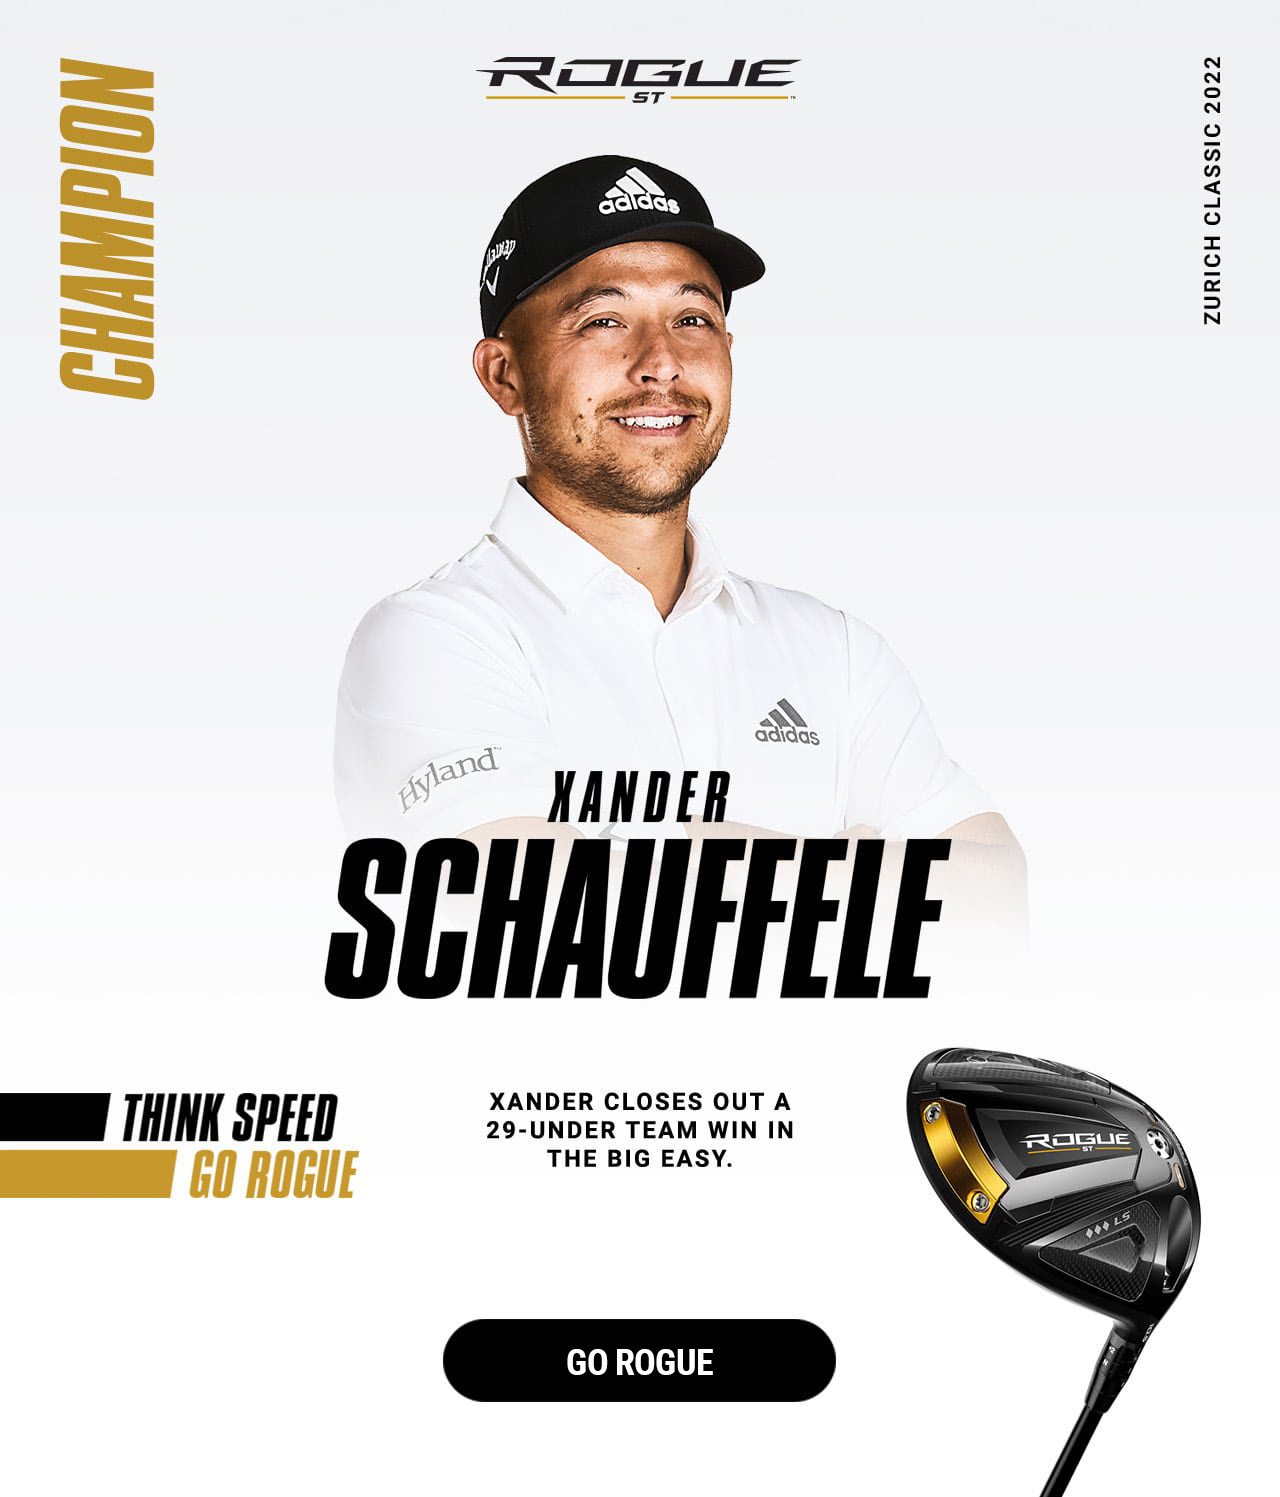 Xander Schauffele - Xander closes out a 29-under team win in the Big Easy.